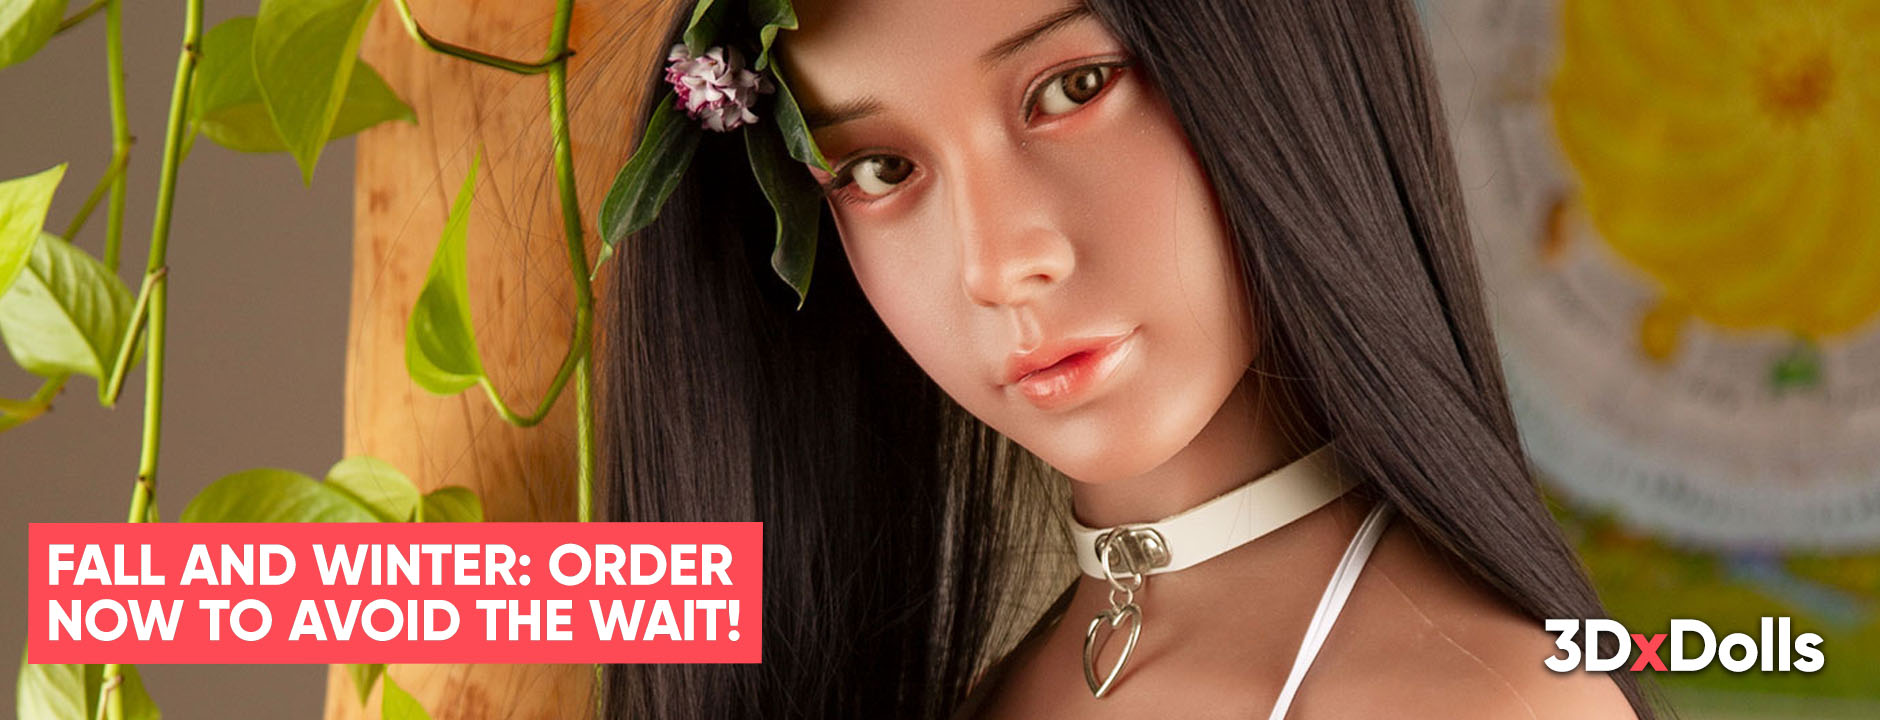 Fall and Winter Are Coming - Order Your Doll Soon!